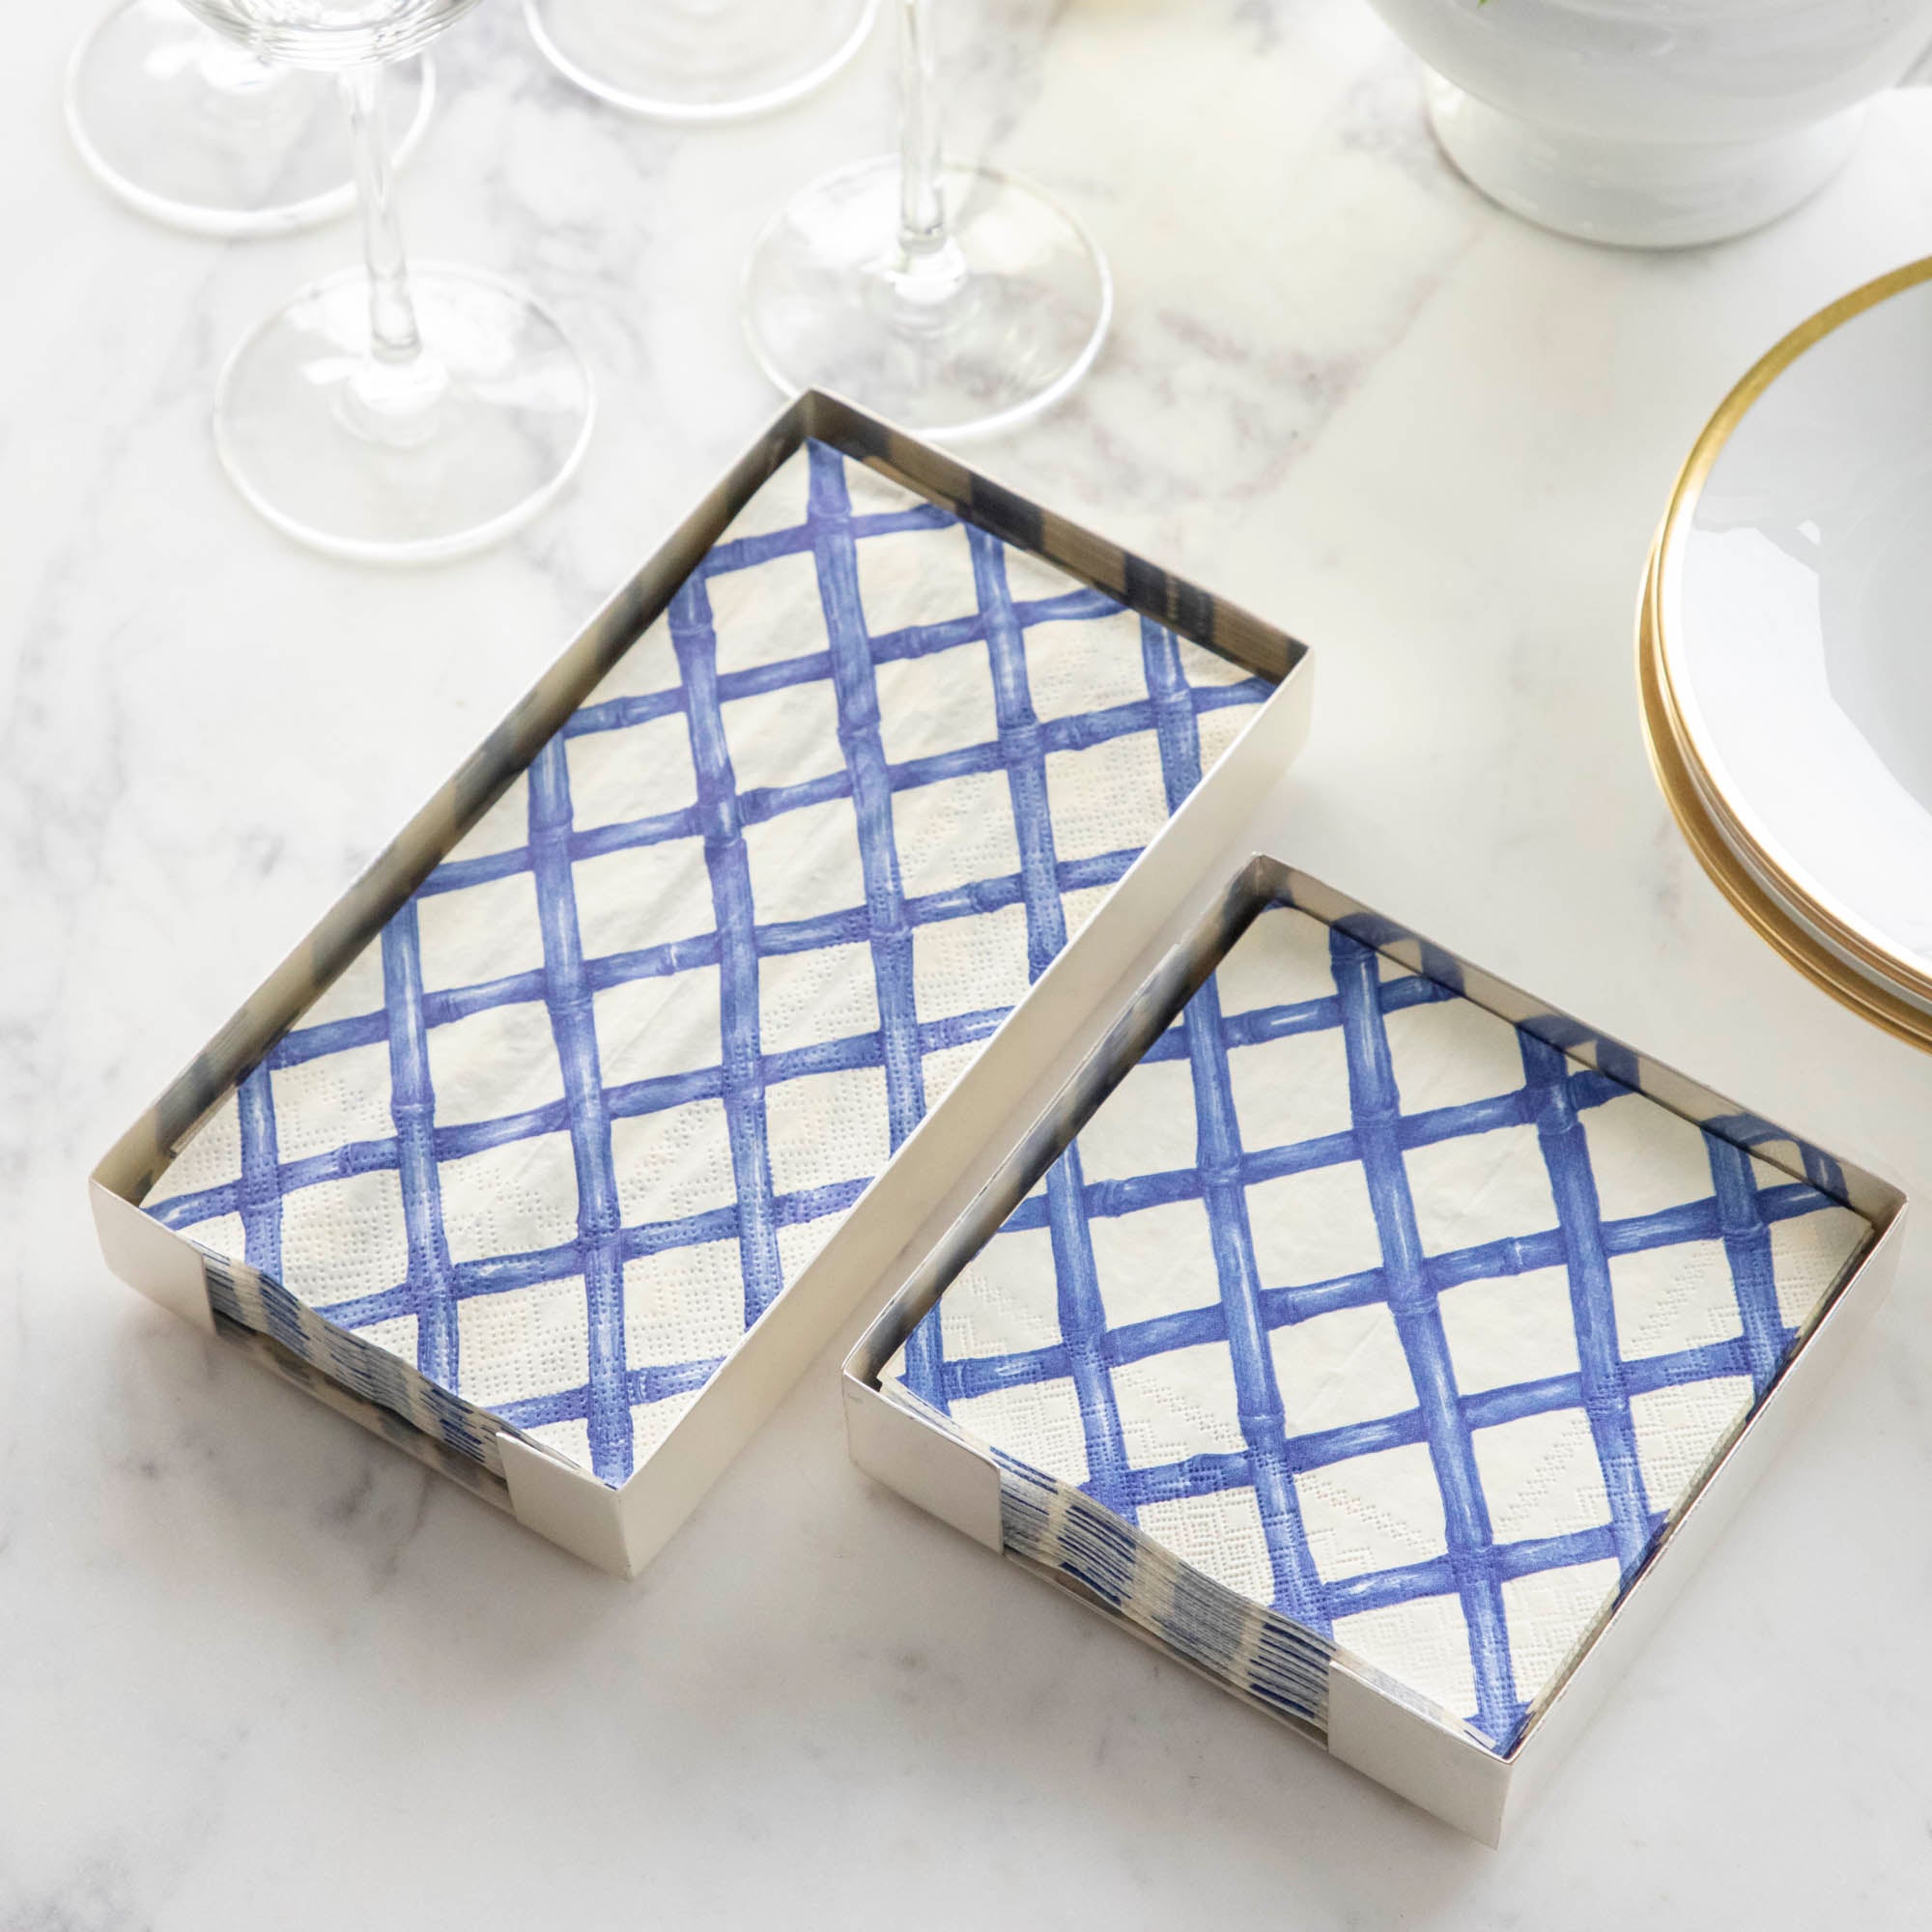 A stack of Blue Lattice Guest Napkins and a stack of Blue Lattice Cocktail Napkins in silver napkin holders on a marble table.